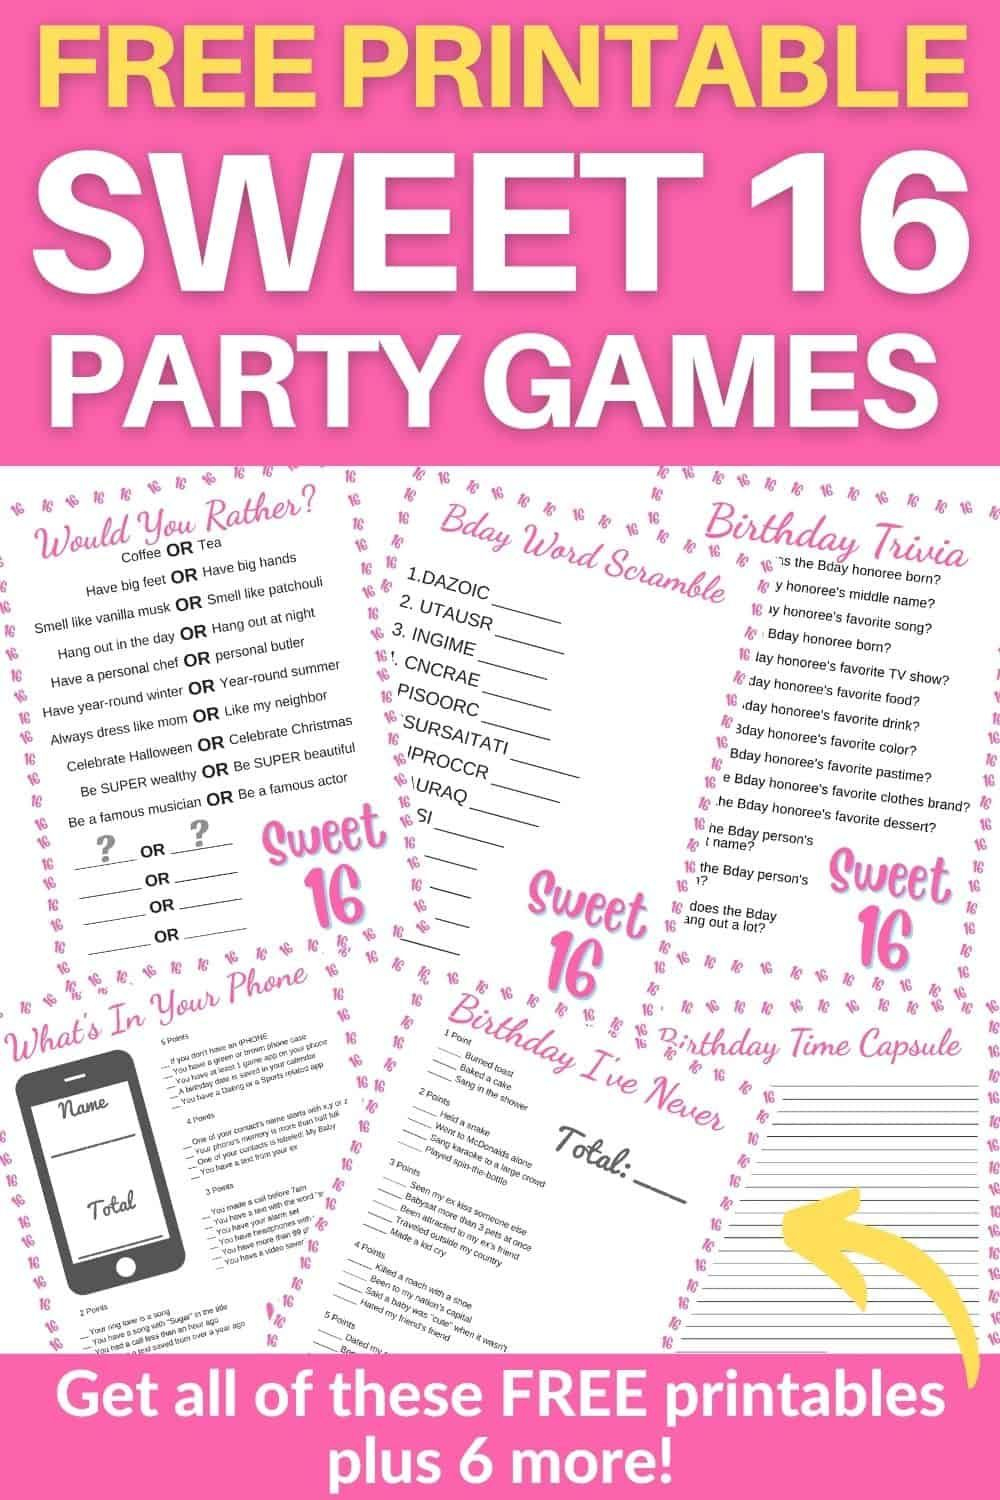 Sweet 16 Party Games - Free Printables | Sweet 16 Games, Sweet 16 regarding Free Sweet 16 Printables